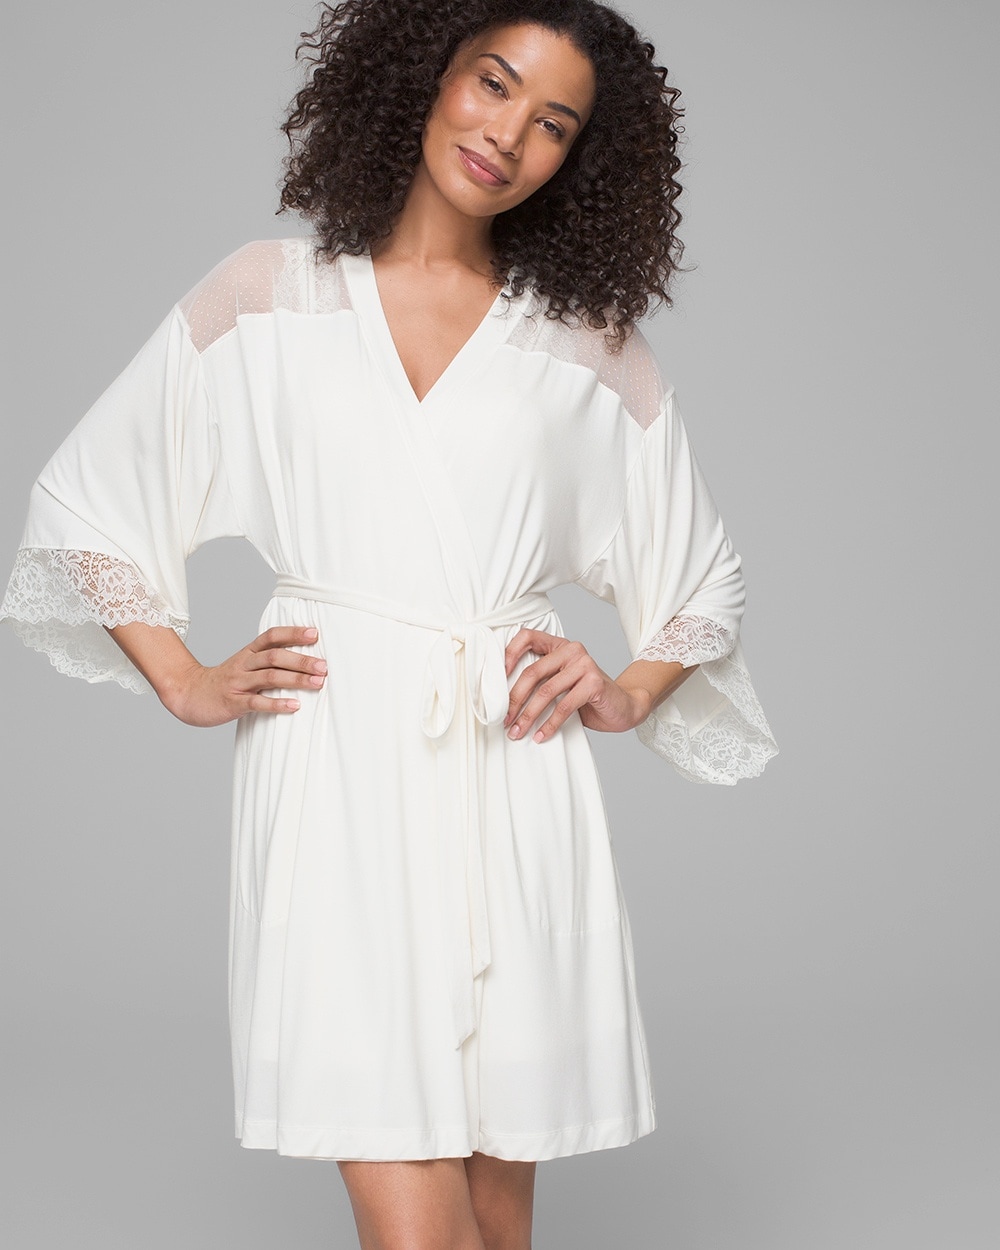 Cool Nights Lace Short Robe